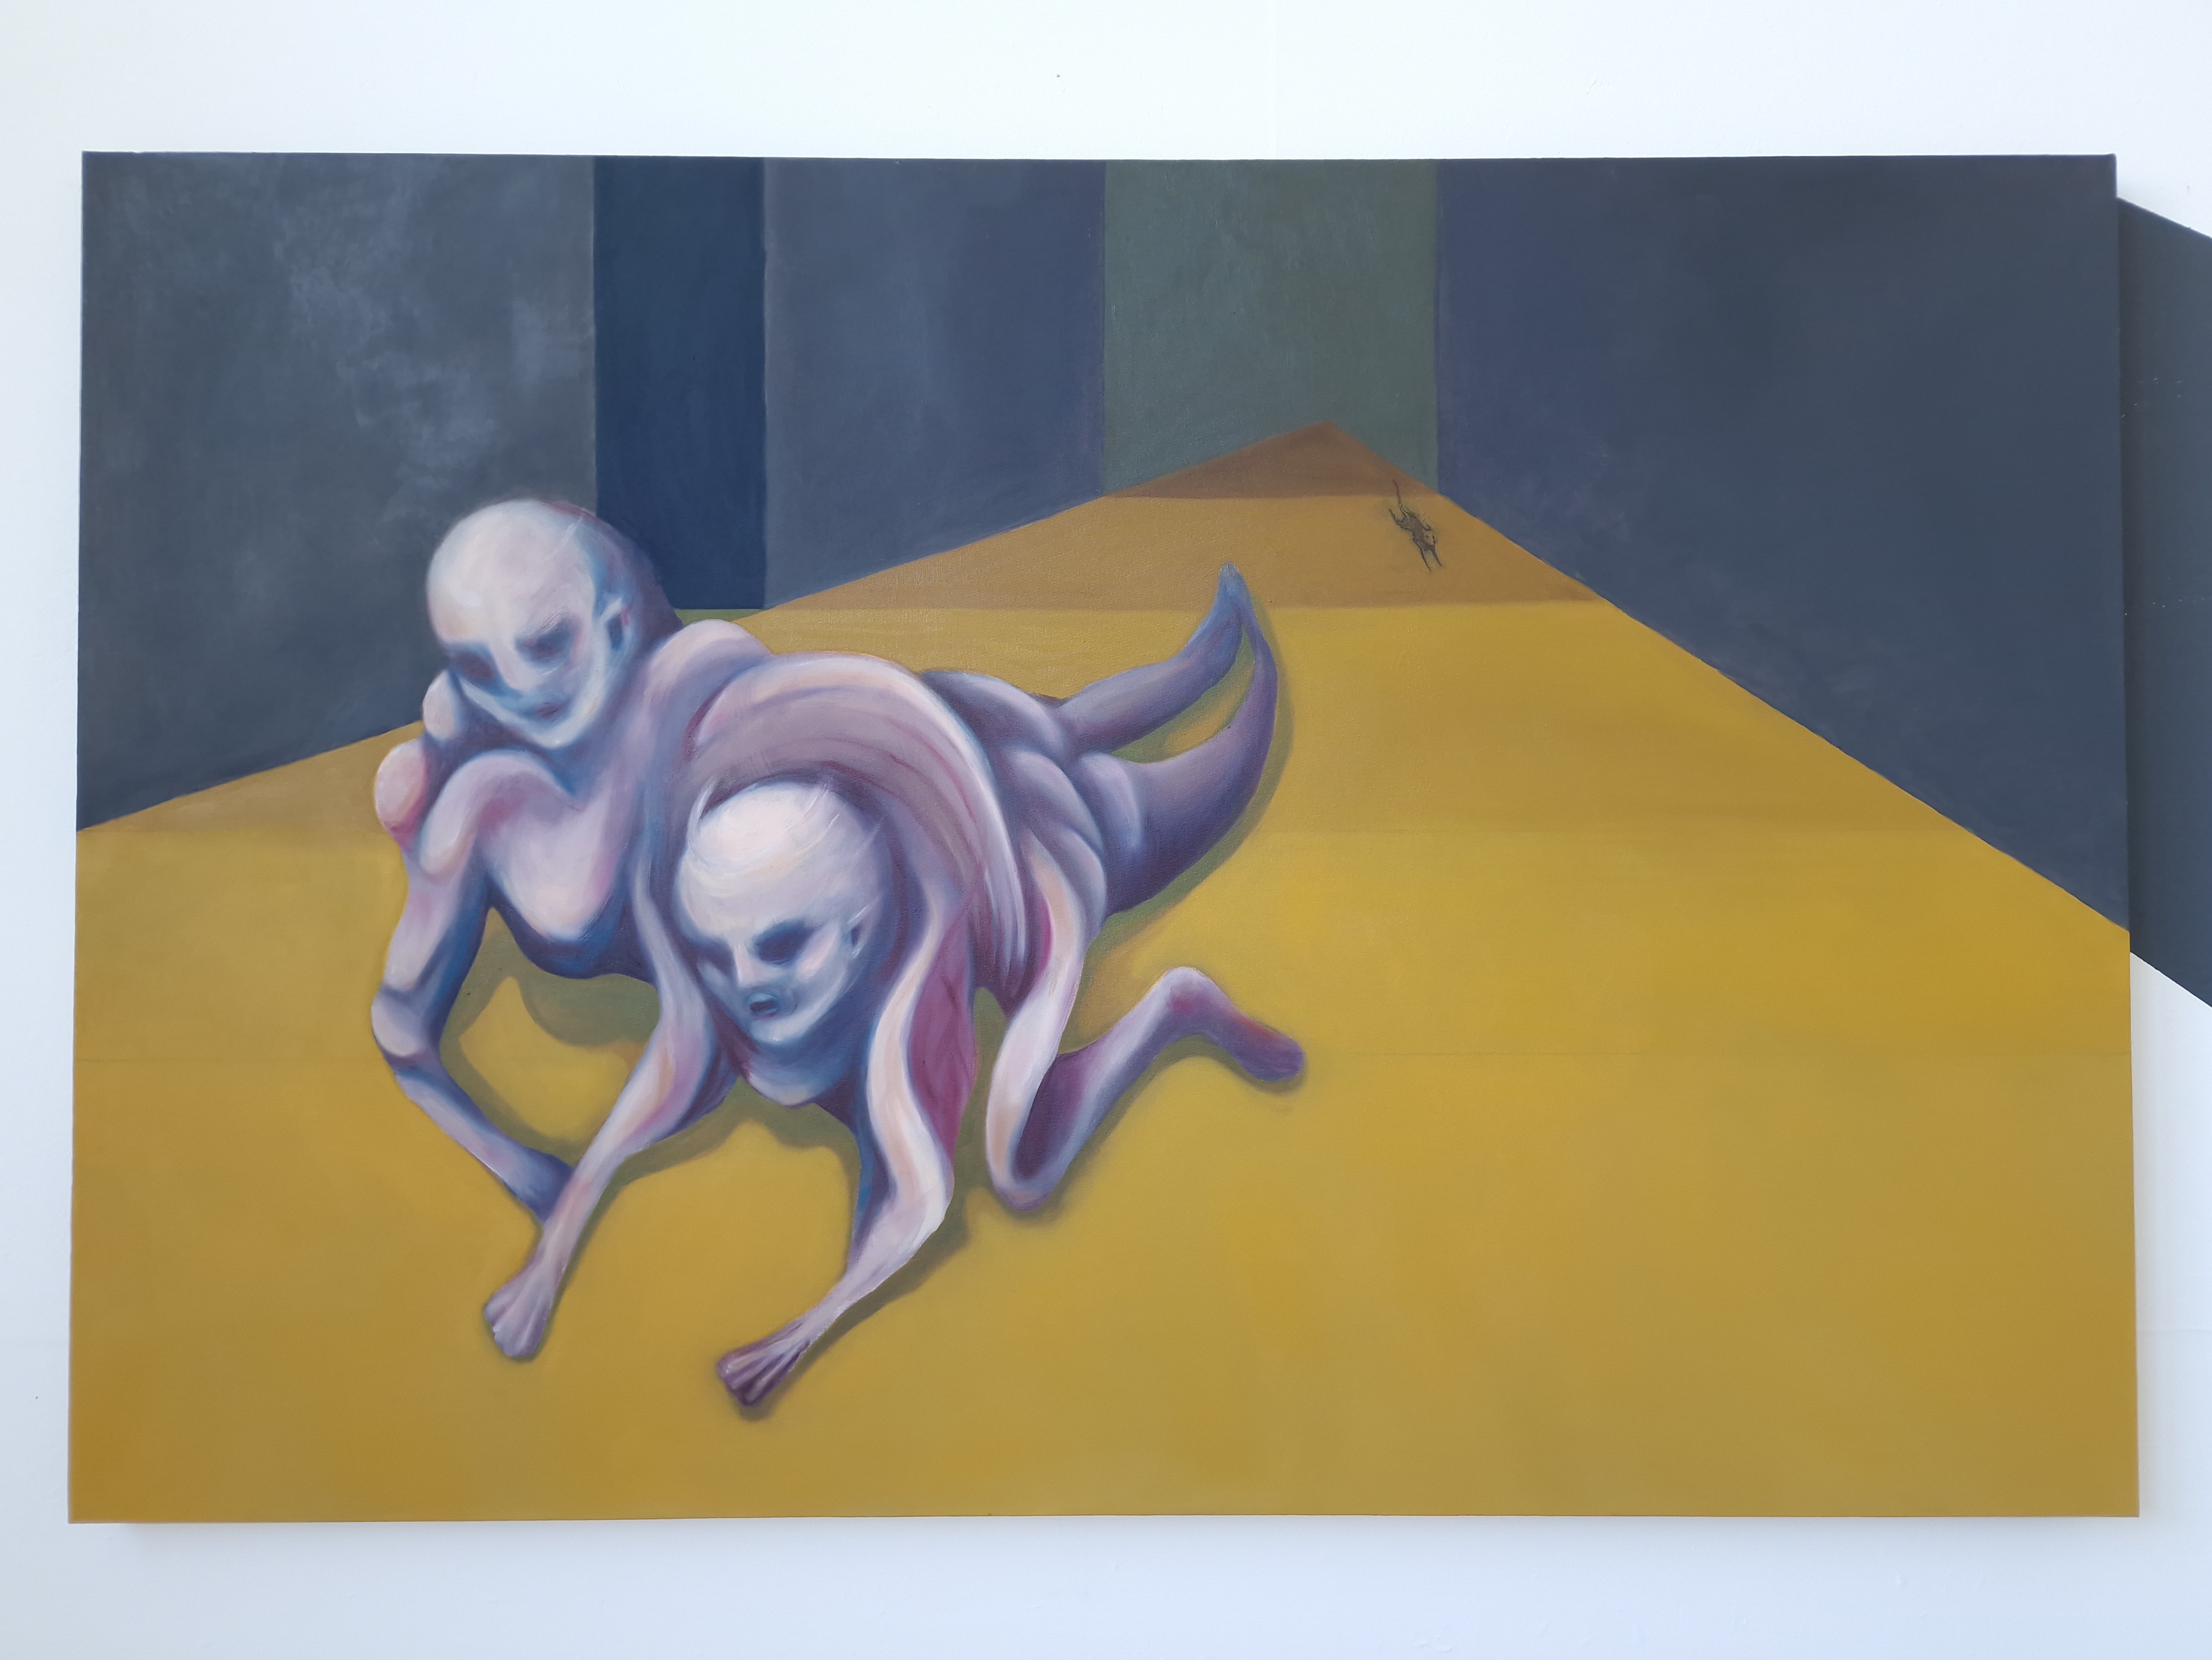 An oil painting by Elena Genovese that depicts two figures and a dog-like animal travelling through liminal space. The figures' bodies are merging together in the foreground and the animal is in the distance.